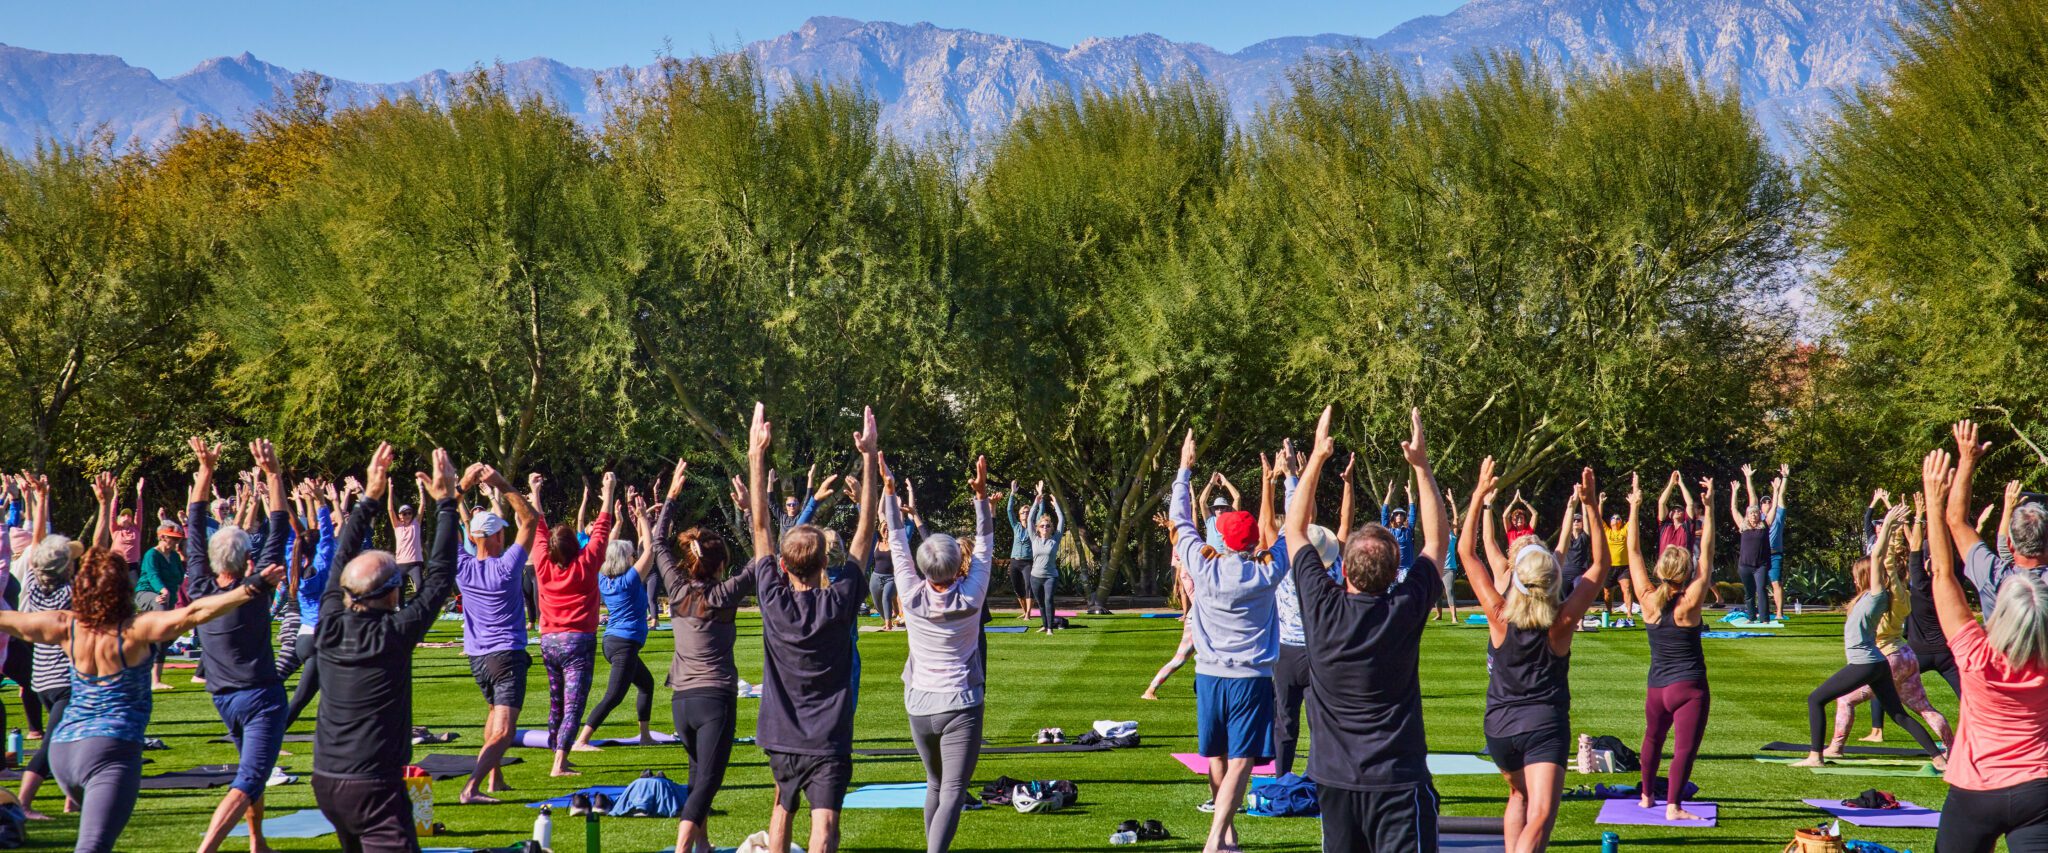 A large group of people of various ages engaged in an outdoor yoga class on a sunny day with mountains in the background and trees in the foreground.